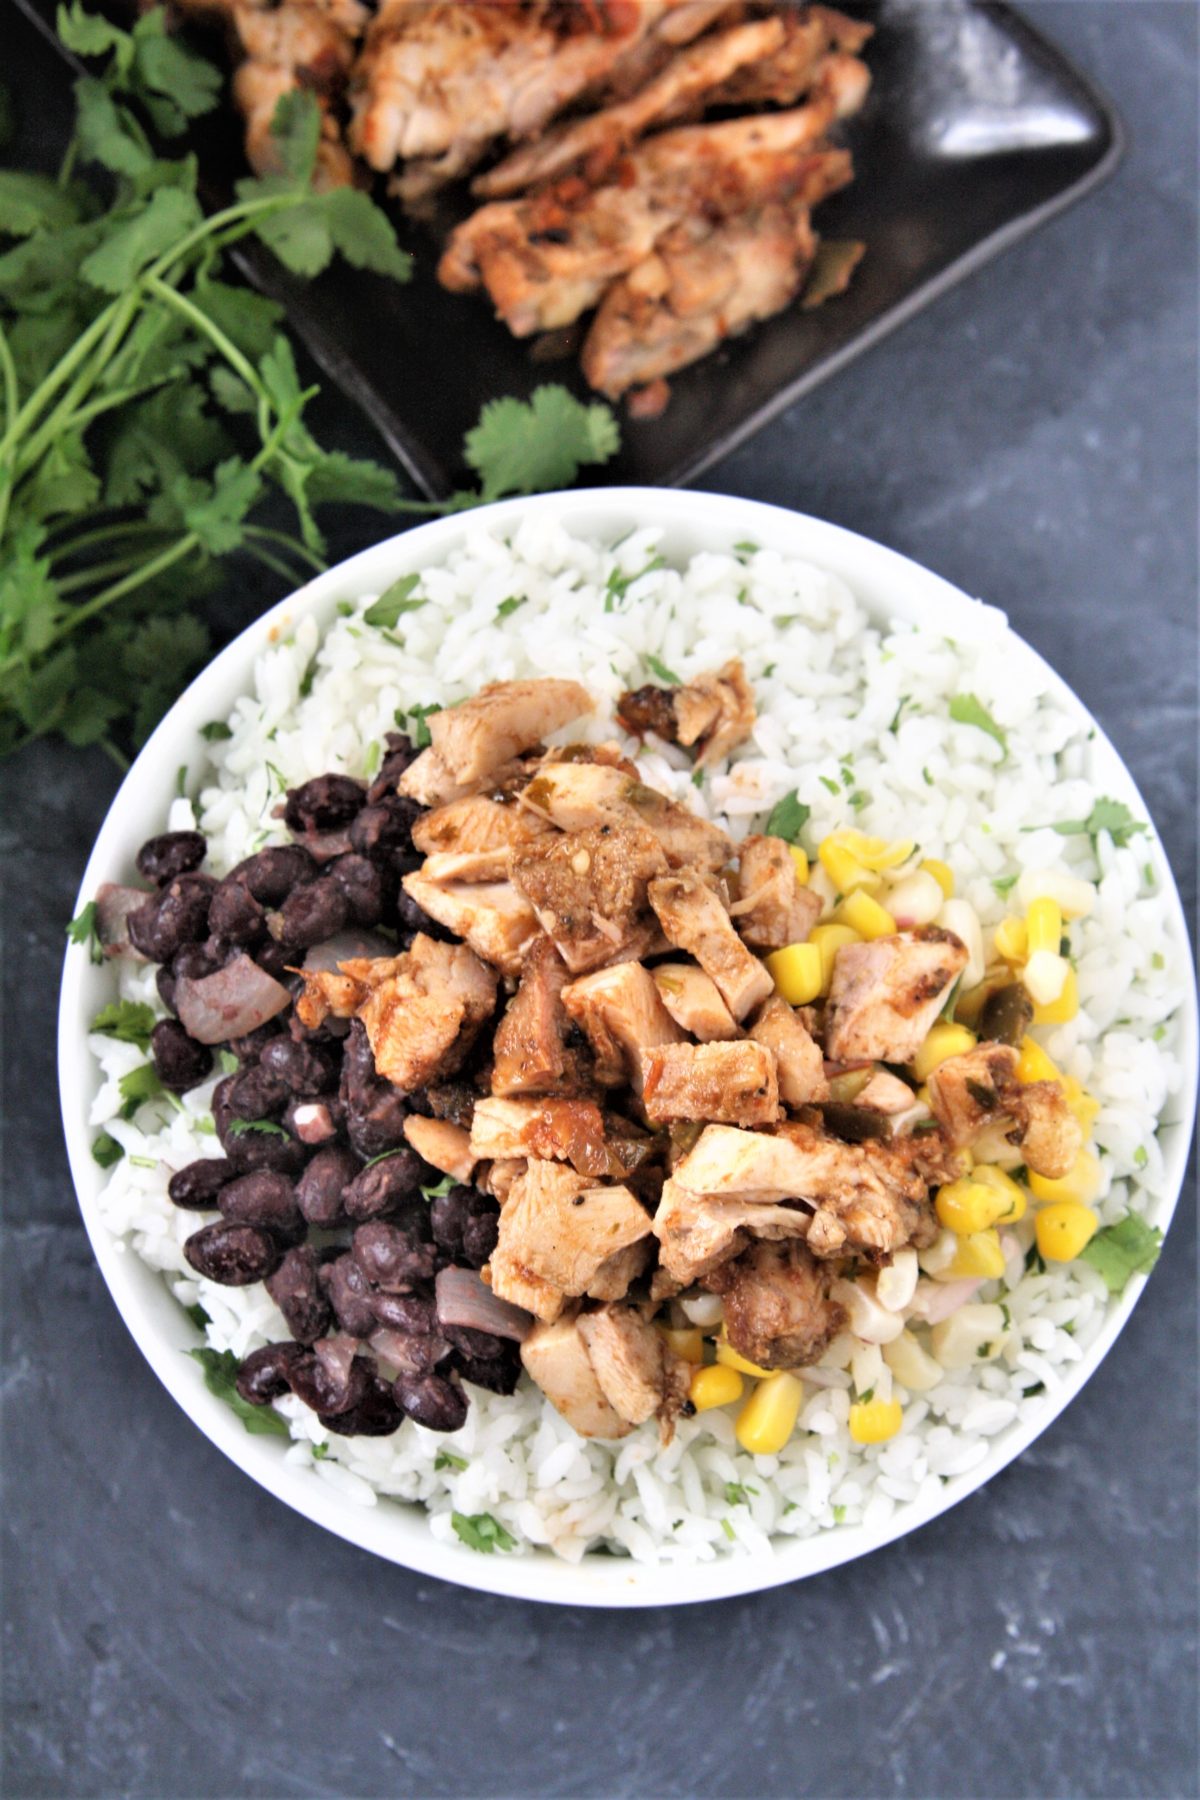 This easy Chipotle Copycat Pollo Asado is flavorful, tender, juicy, and tastes just as good as than the original. Perfect in tacos, burritos, salad bowls, and more!